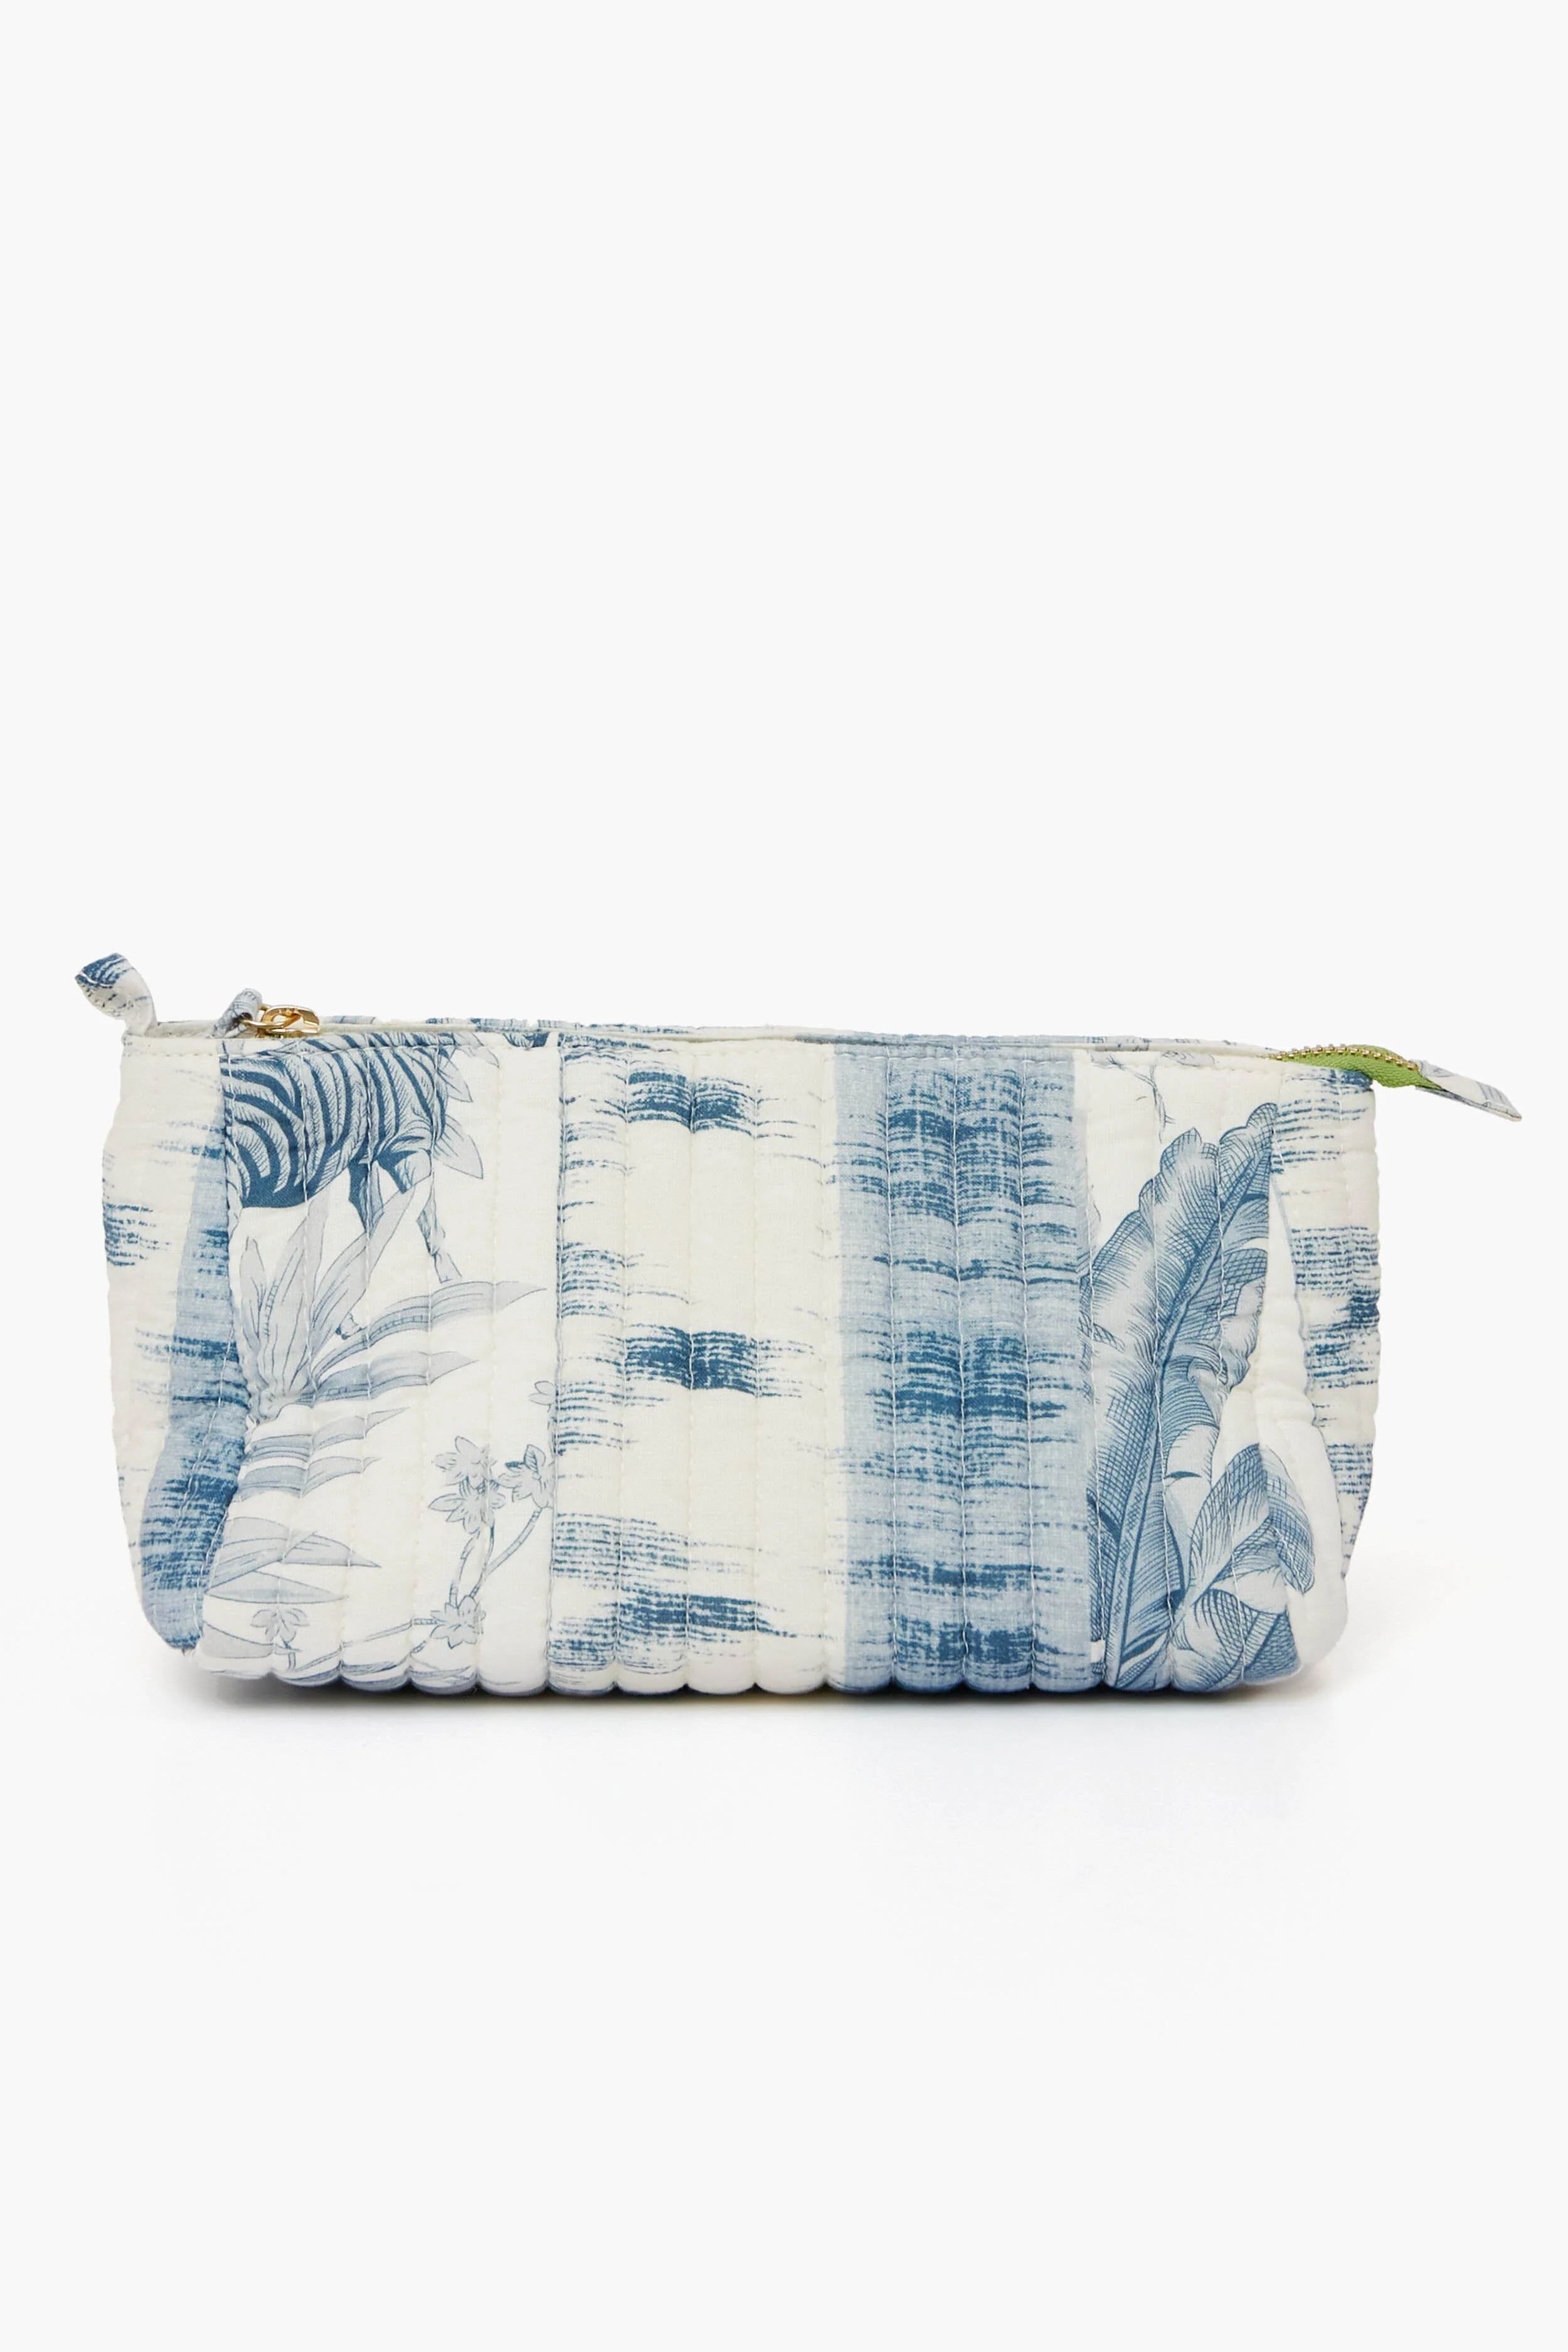 Menagerie Toile Pouch | Tuckernuck (US)